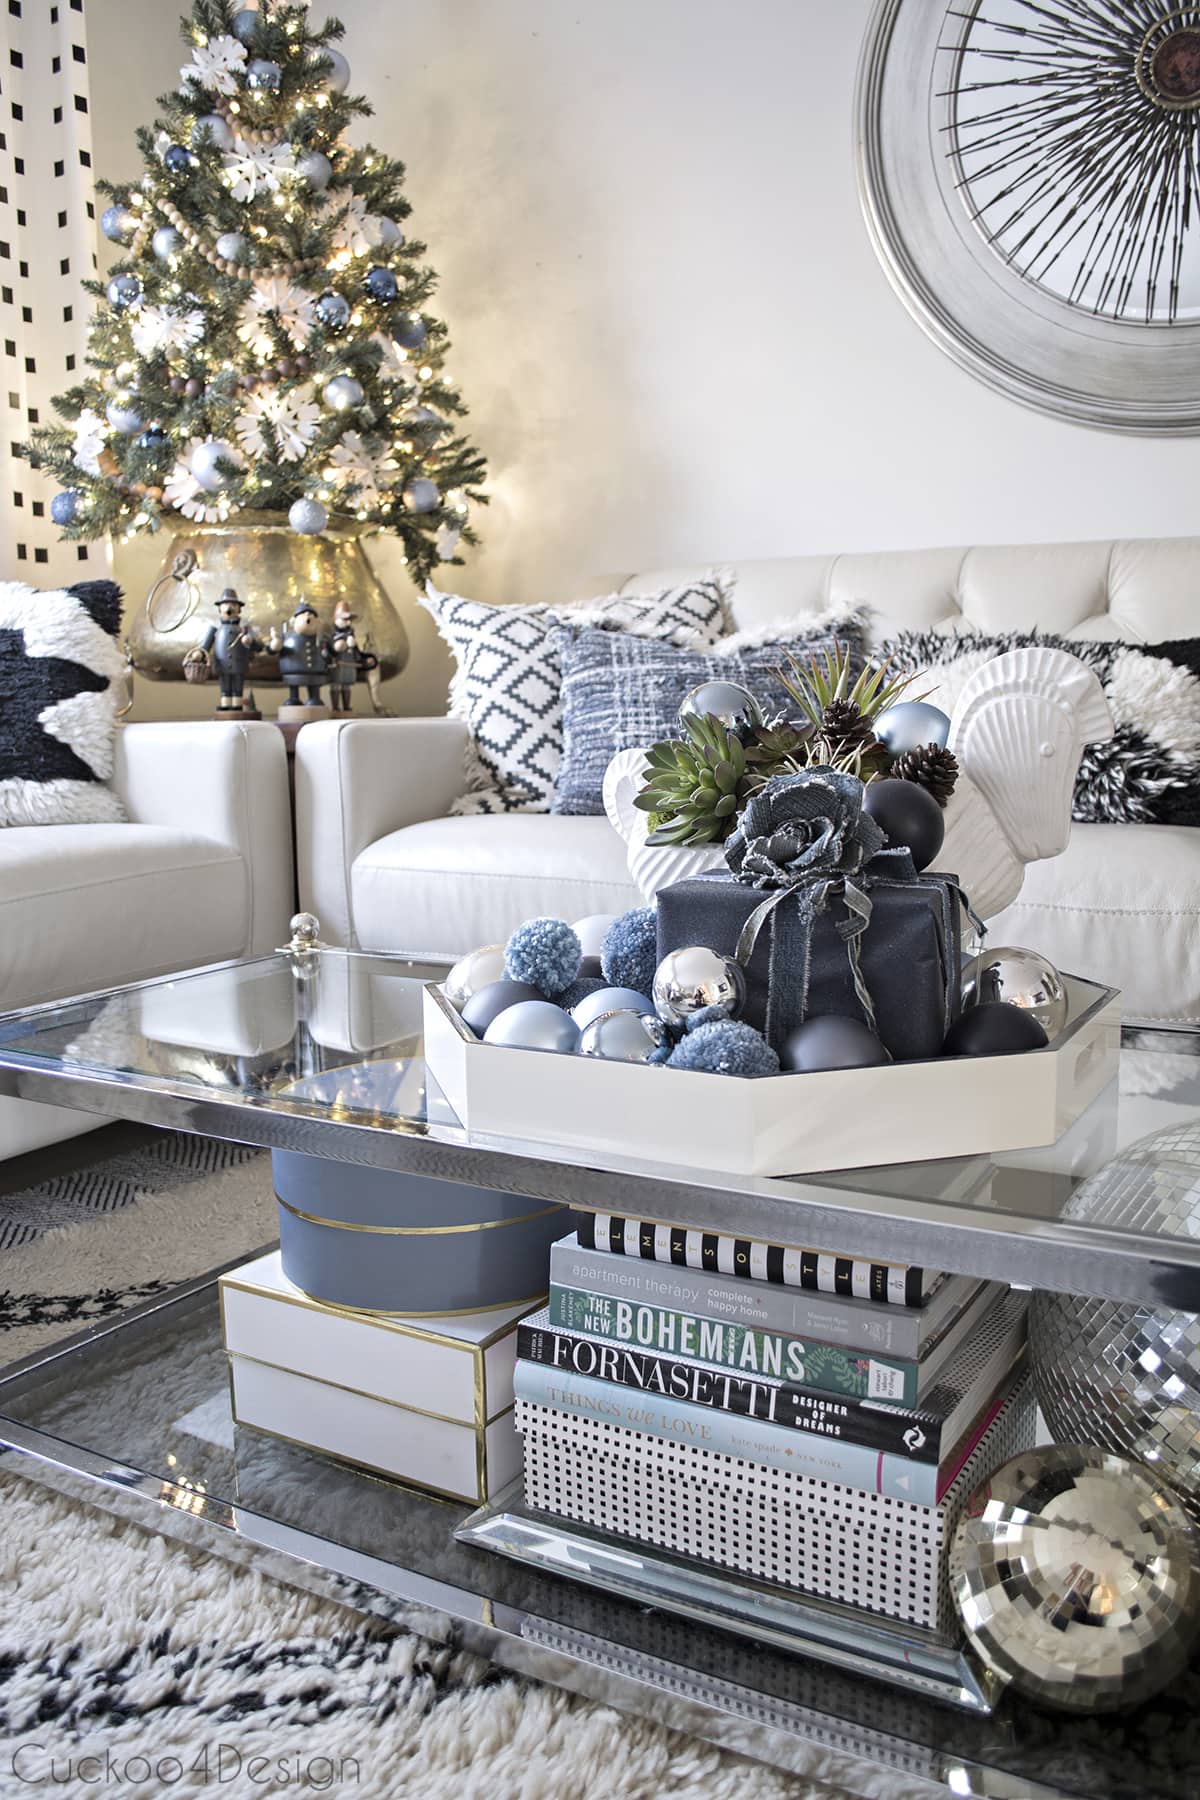 denim blue, black and white eclectic Christmas living room decor and coffee table